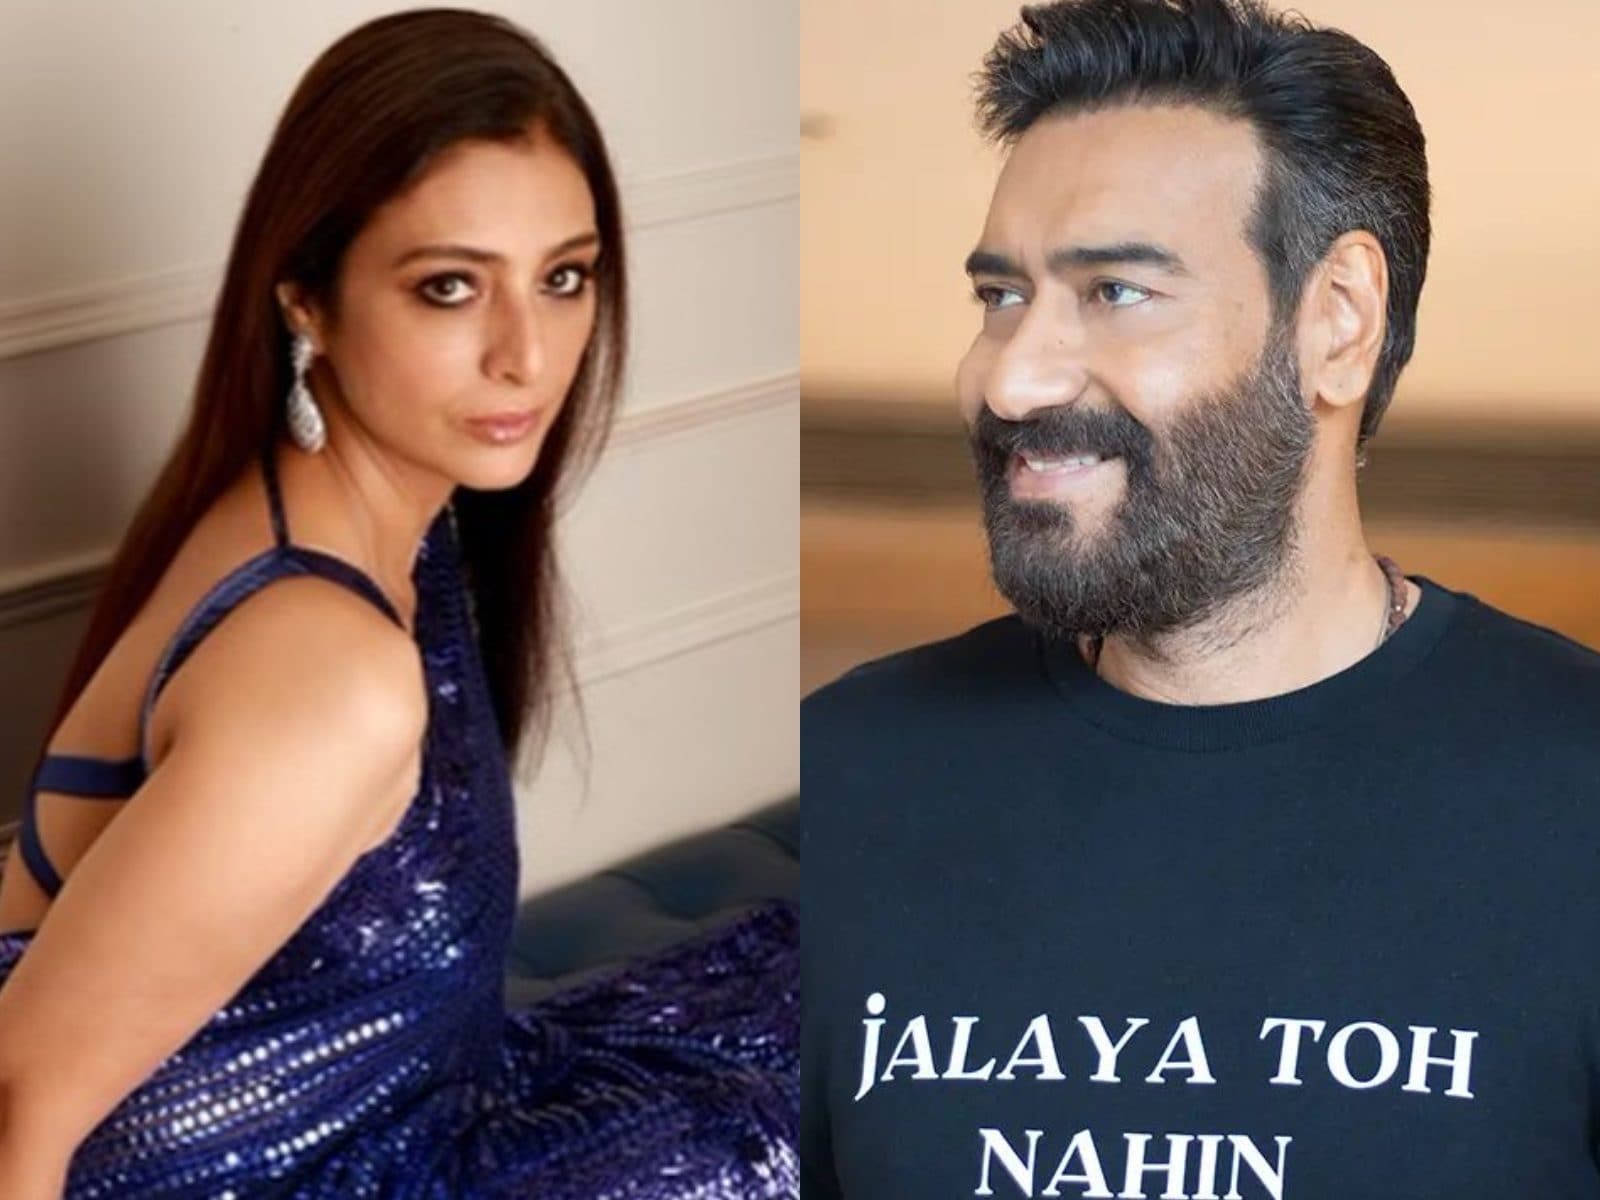 Tabu Reveals She Is Single Today Because of Ajay Devgn: 'I Hope He